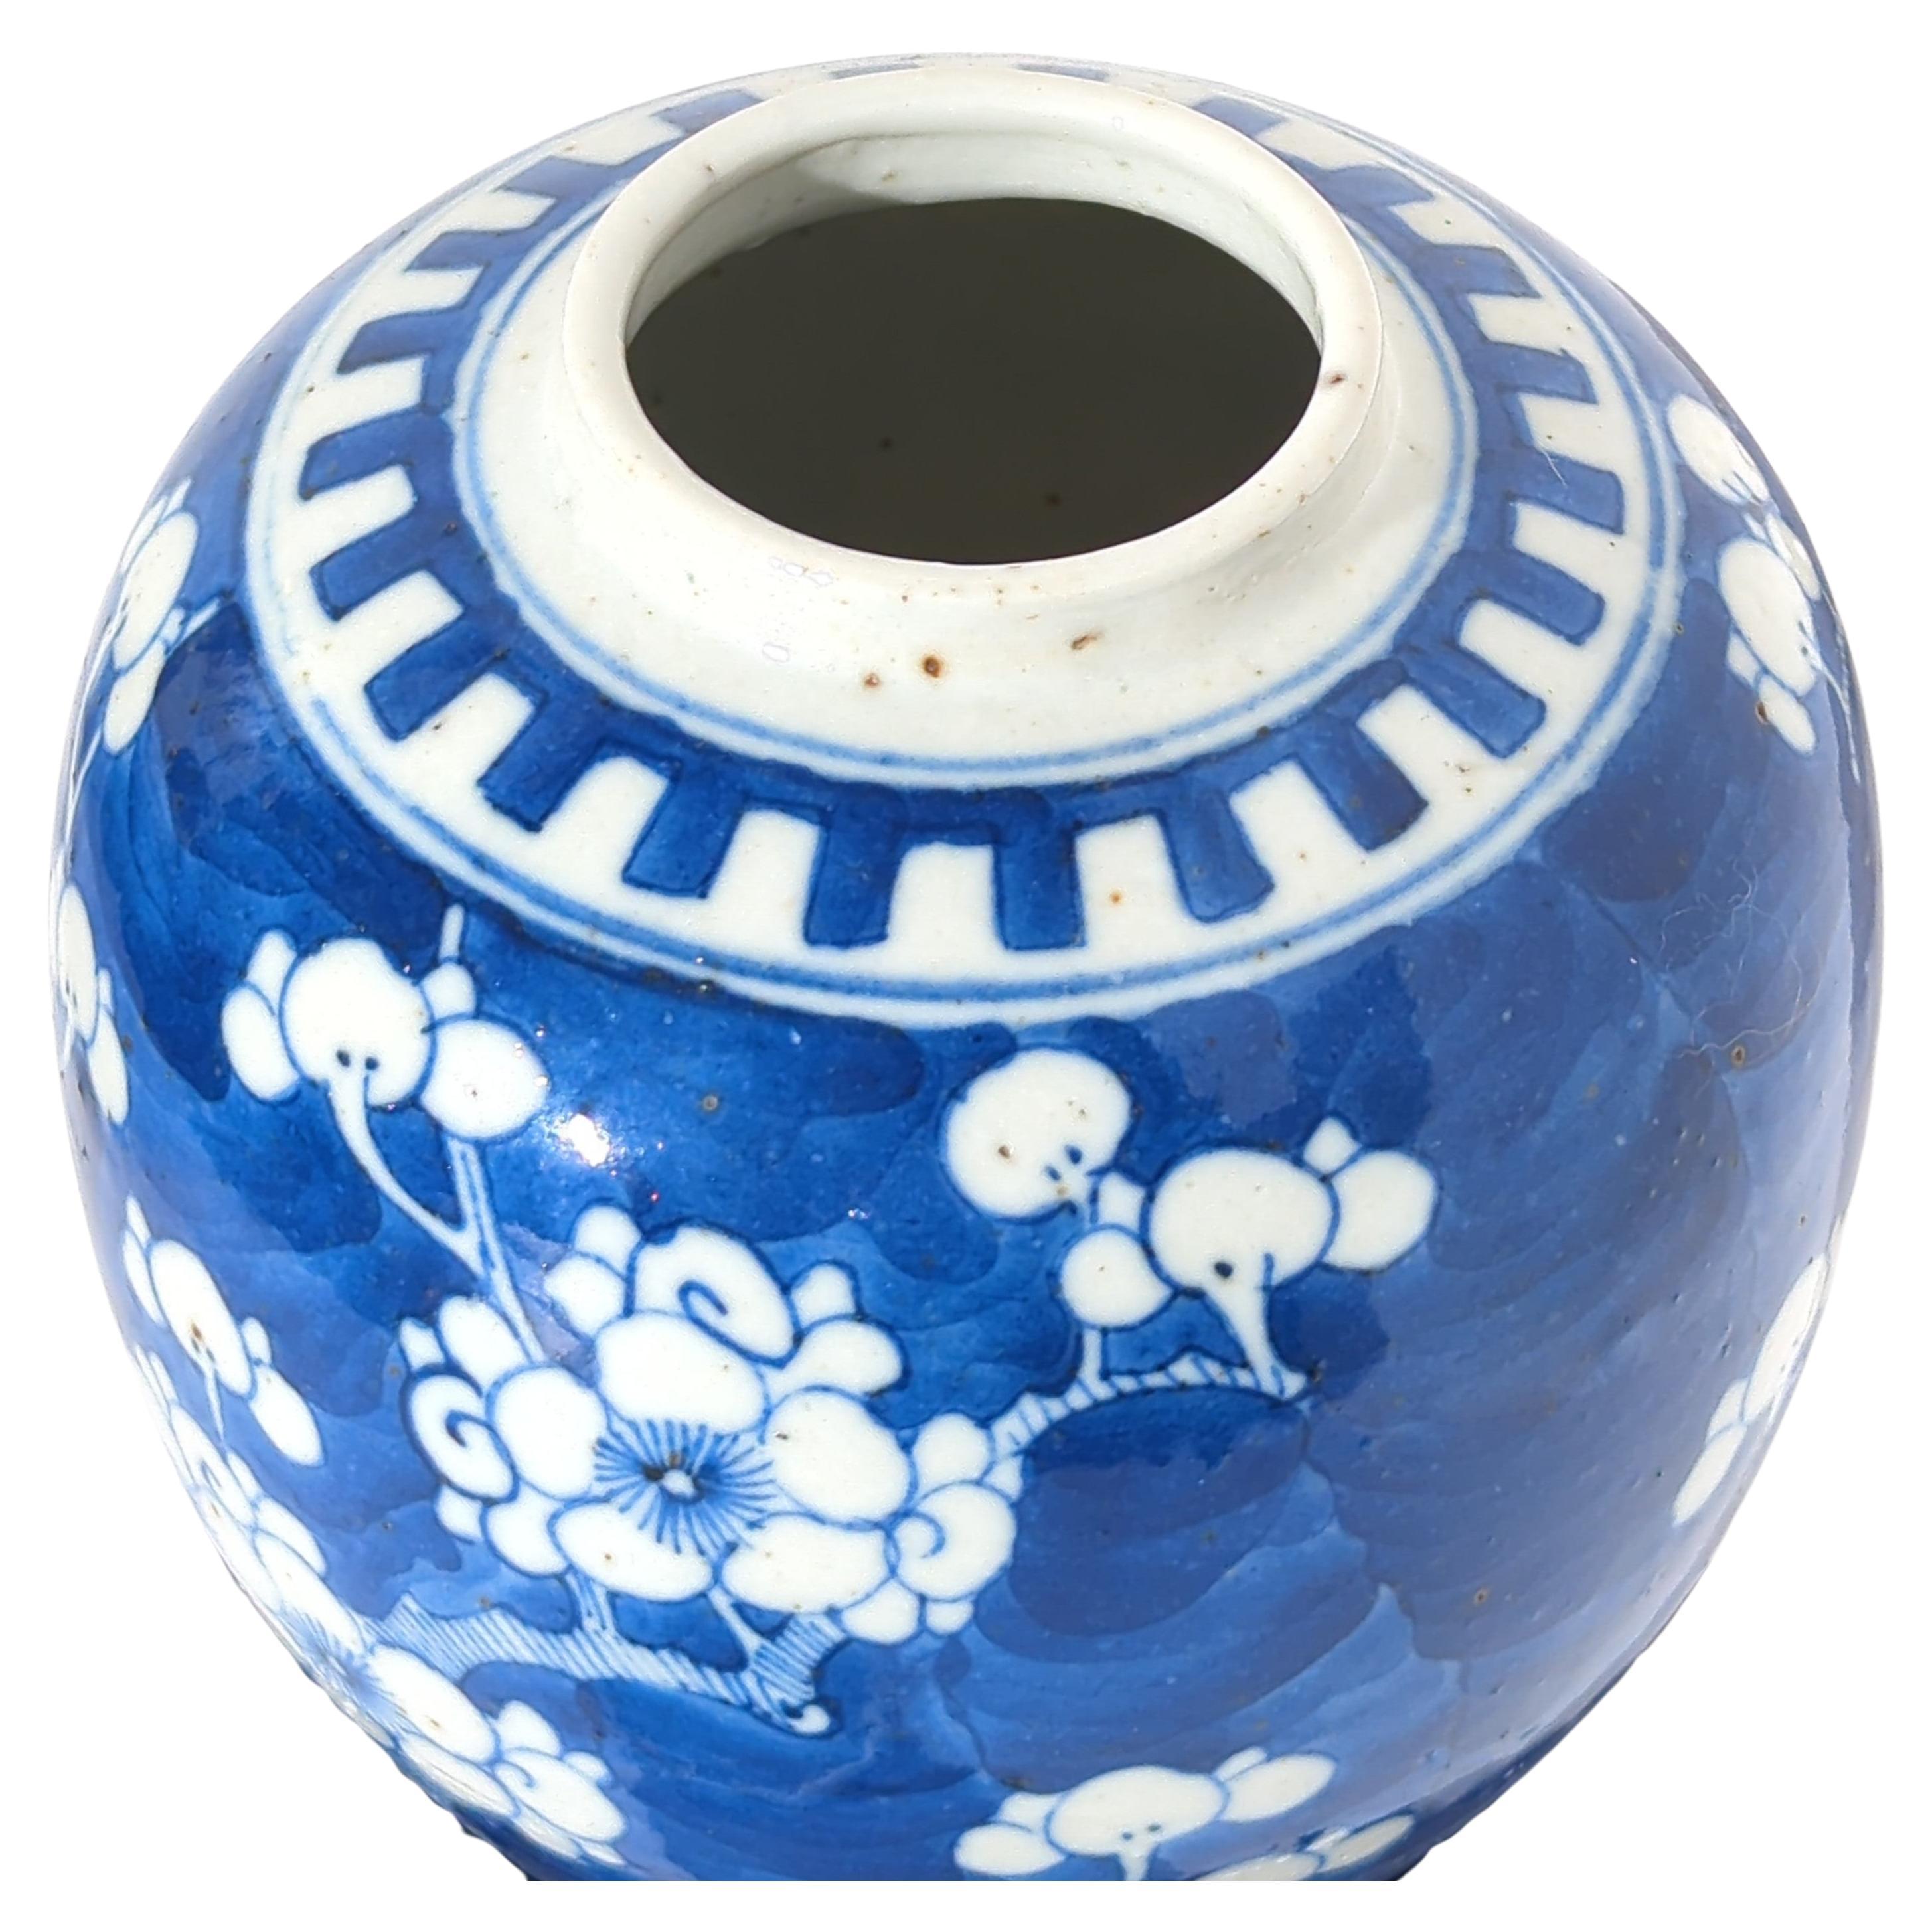 20th Century Antique Chinese Blue & White Prunus Blossoms Covered Ginger Jar Vase Early 20c